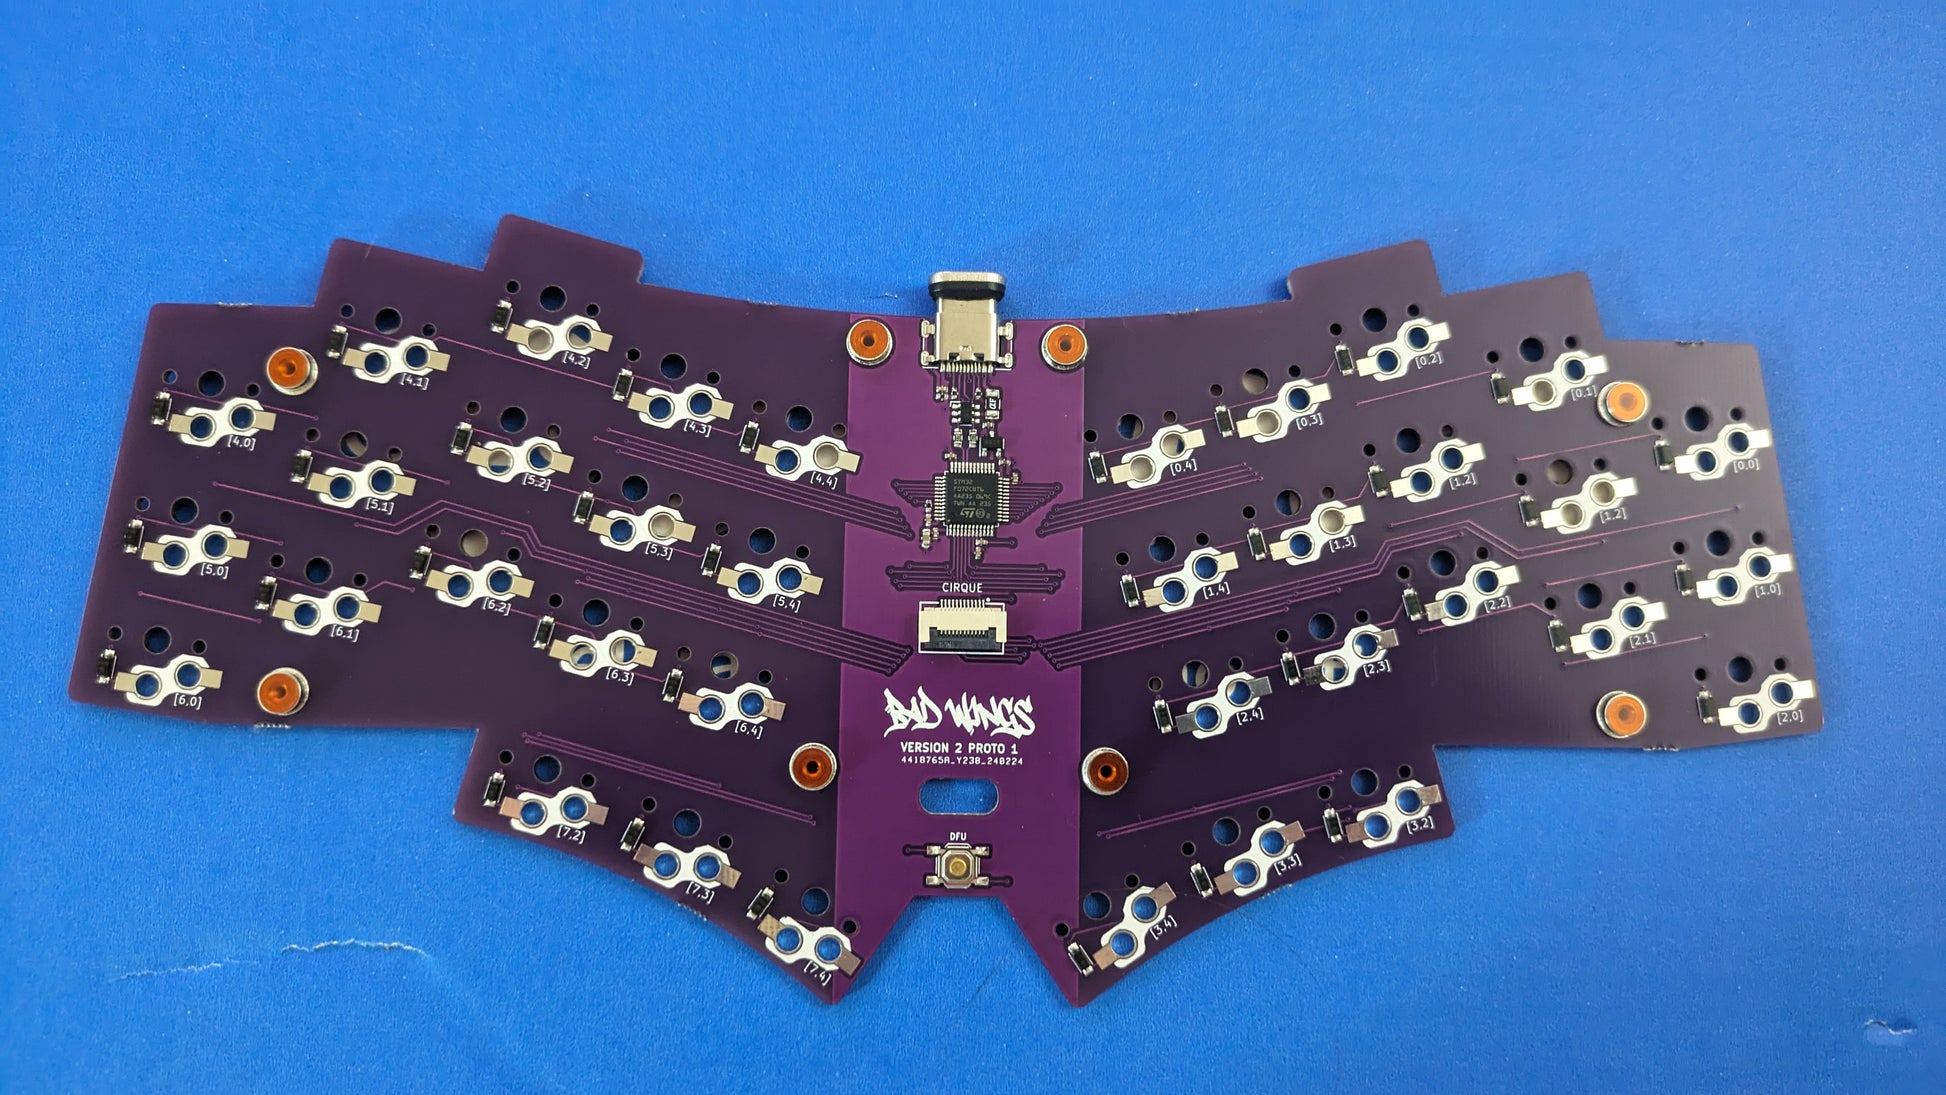 Bad Wings V2 Prototype 1 - back side PCB with components